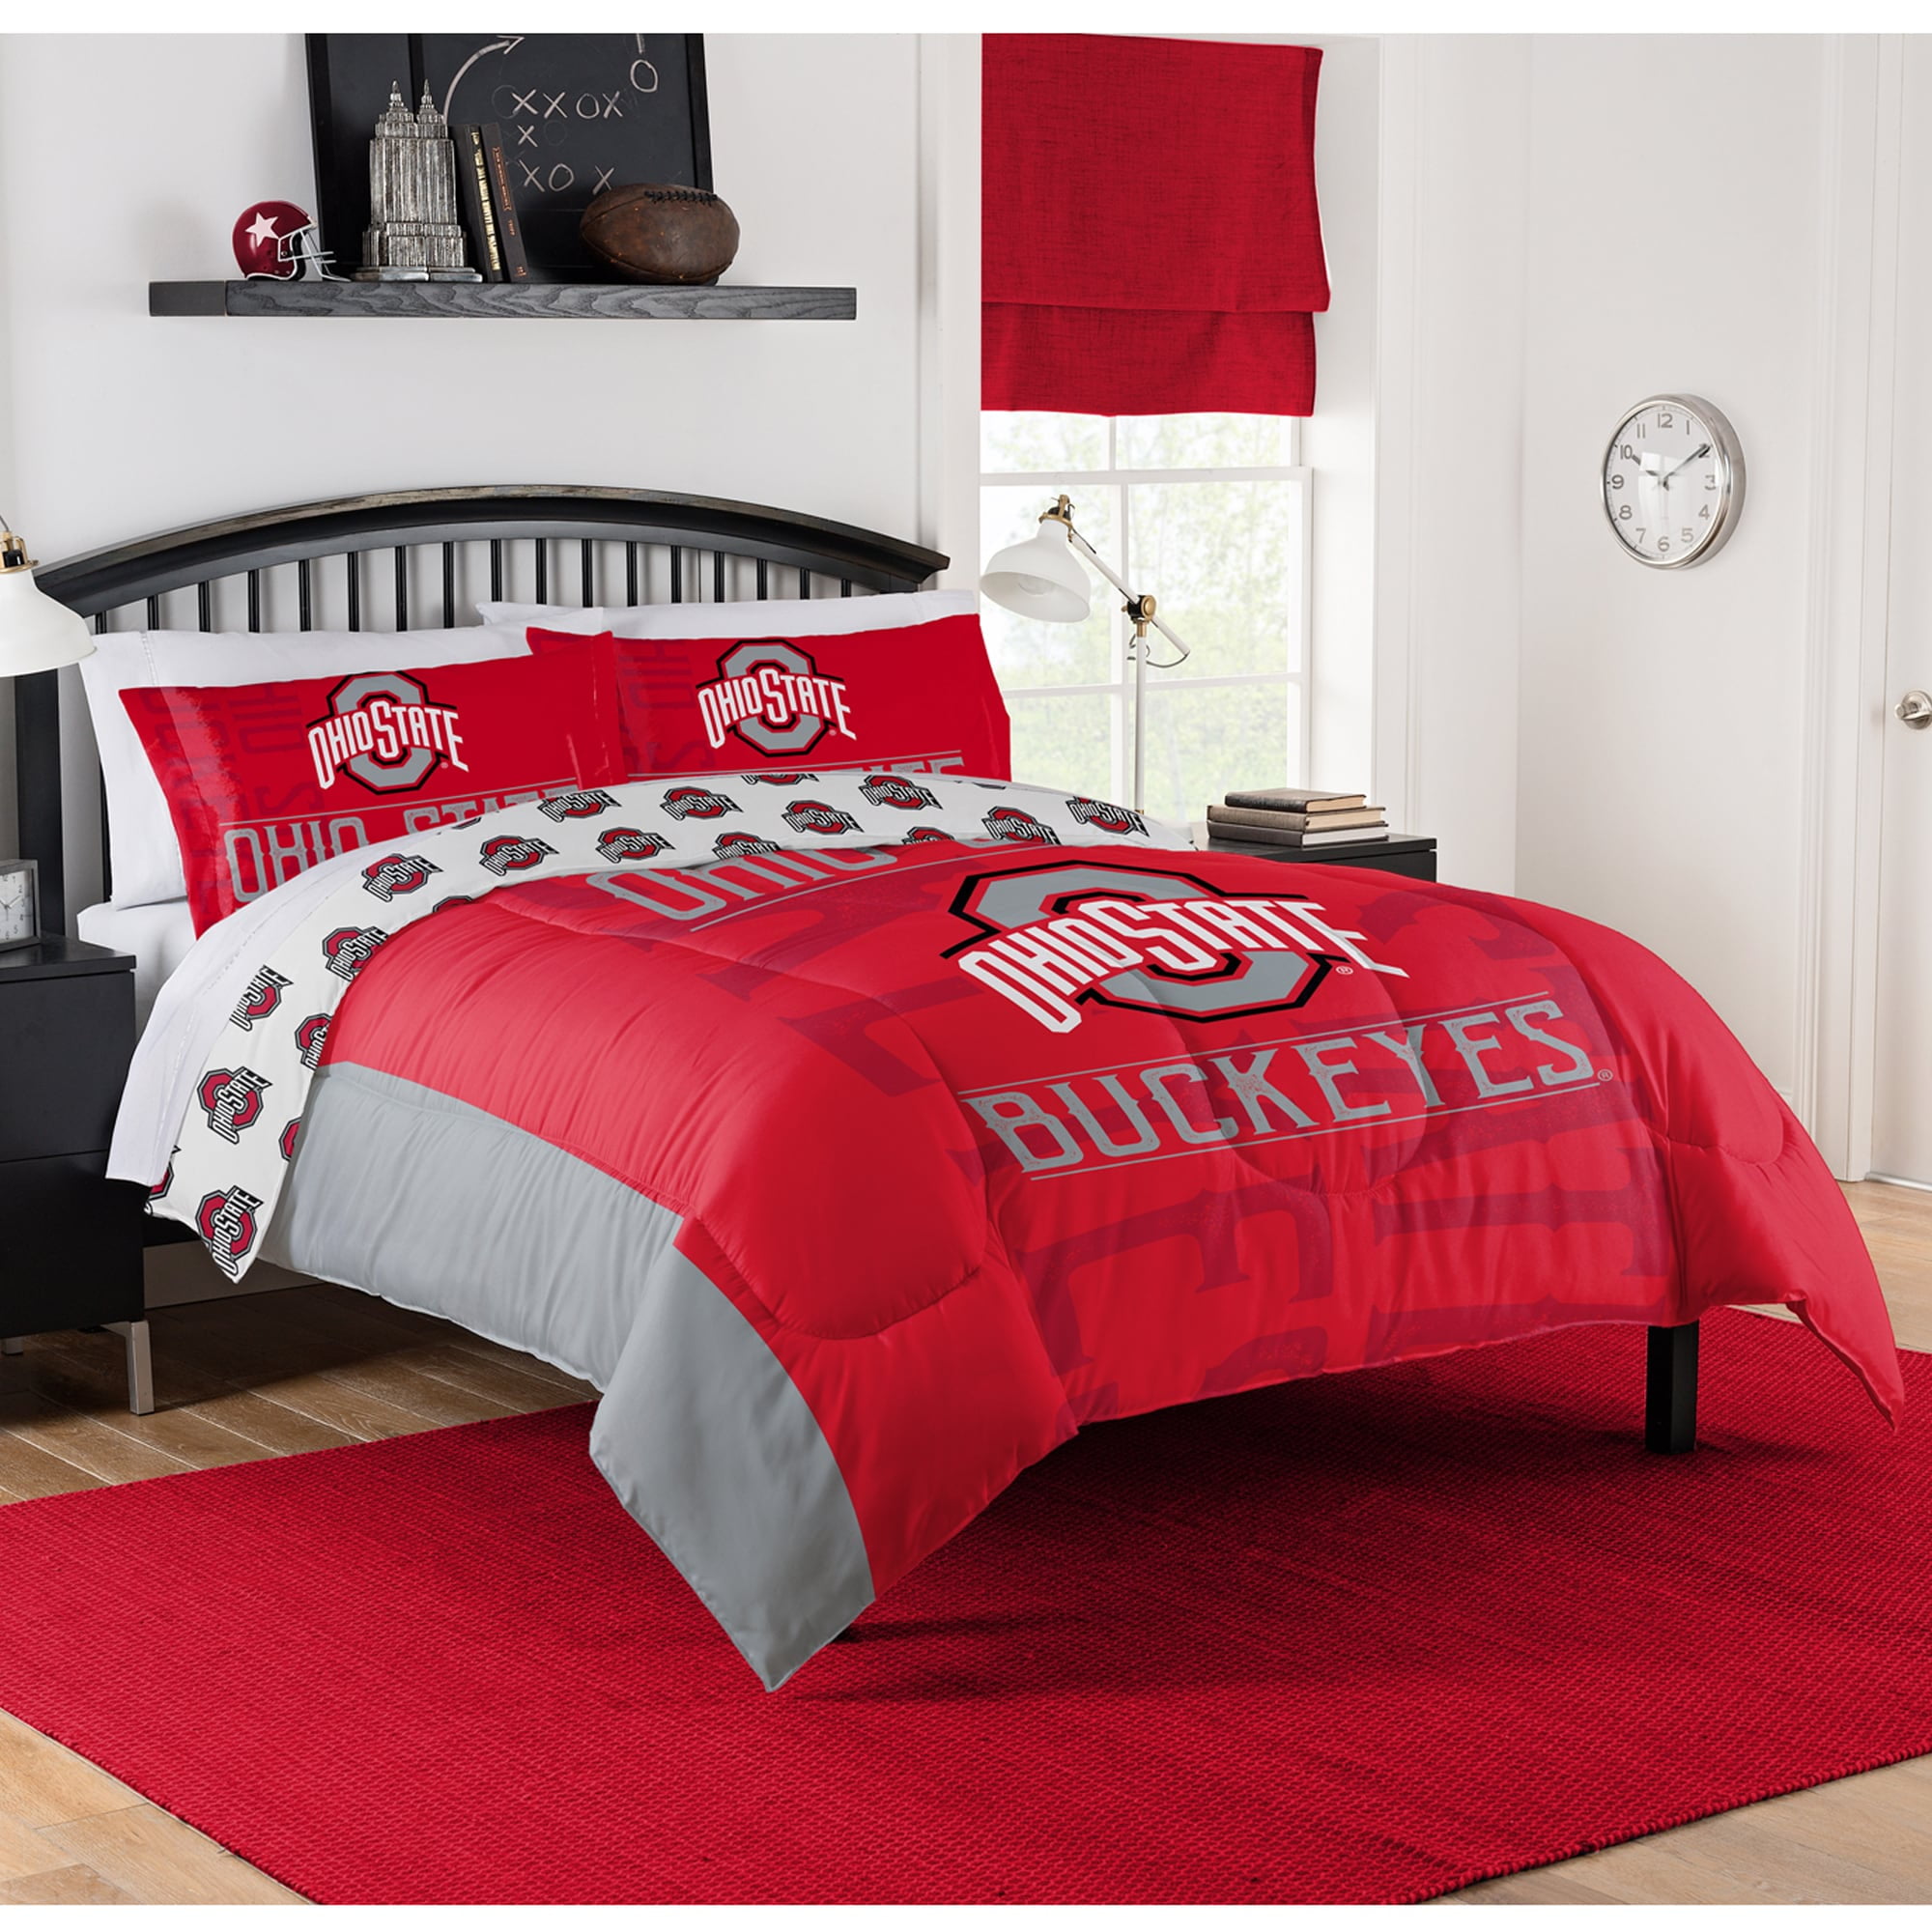 Ohio State Gifts  Buy Unique Ohio State Outdoor Furniture Gifts For Sale  Online - Bright Idea Shops